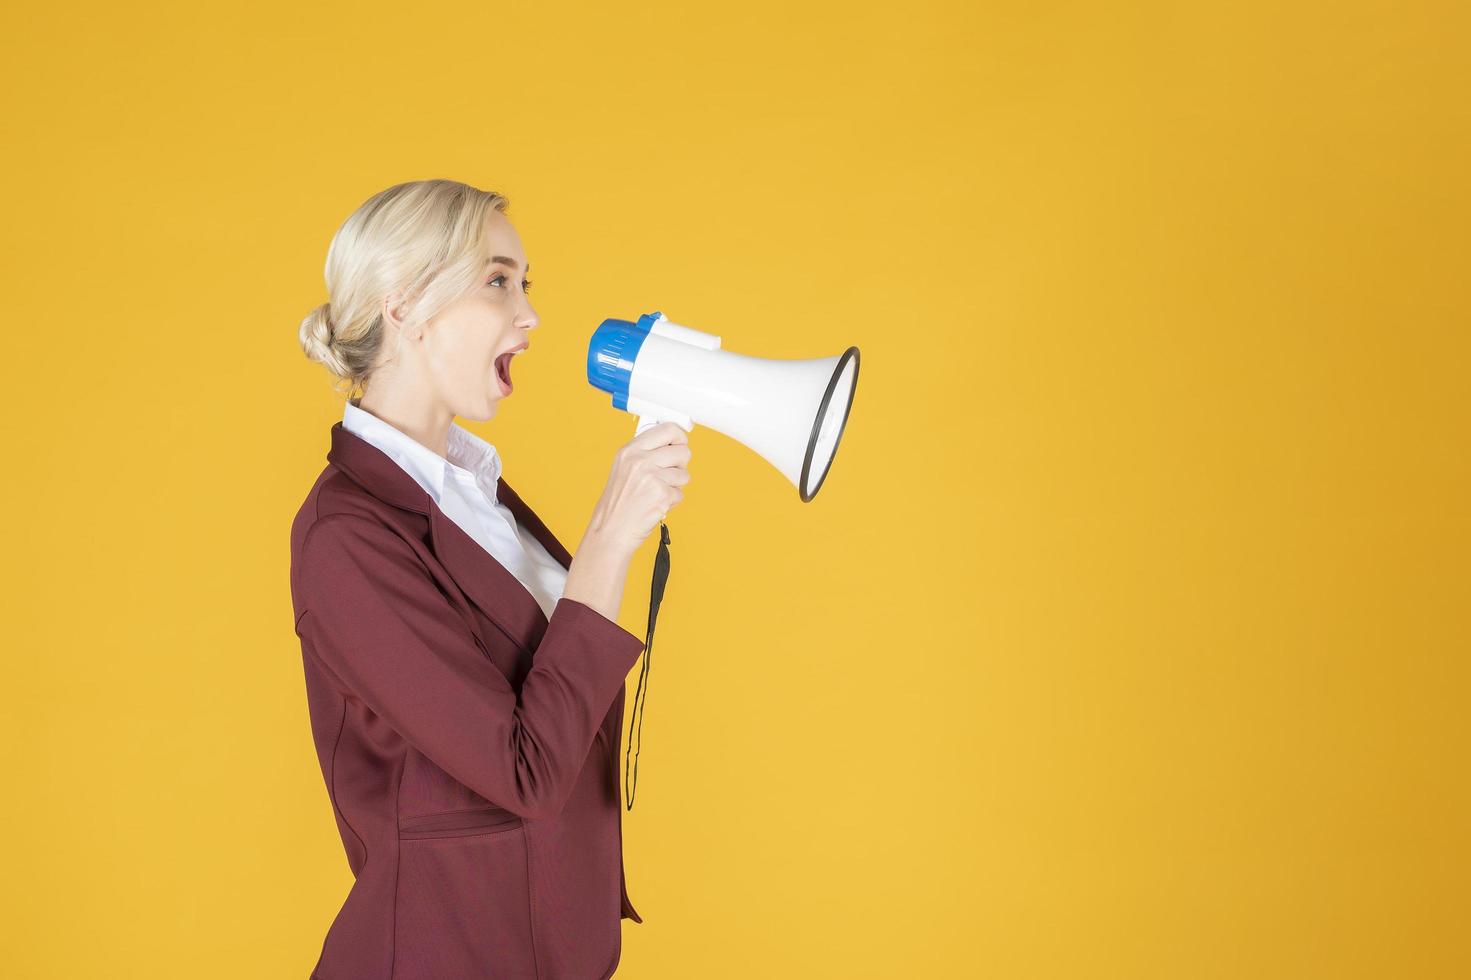 Business woman is announcing from megaphone on yellow background photo